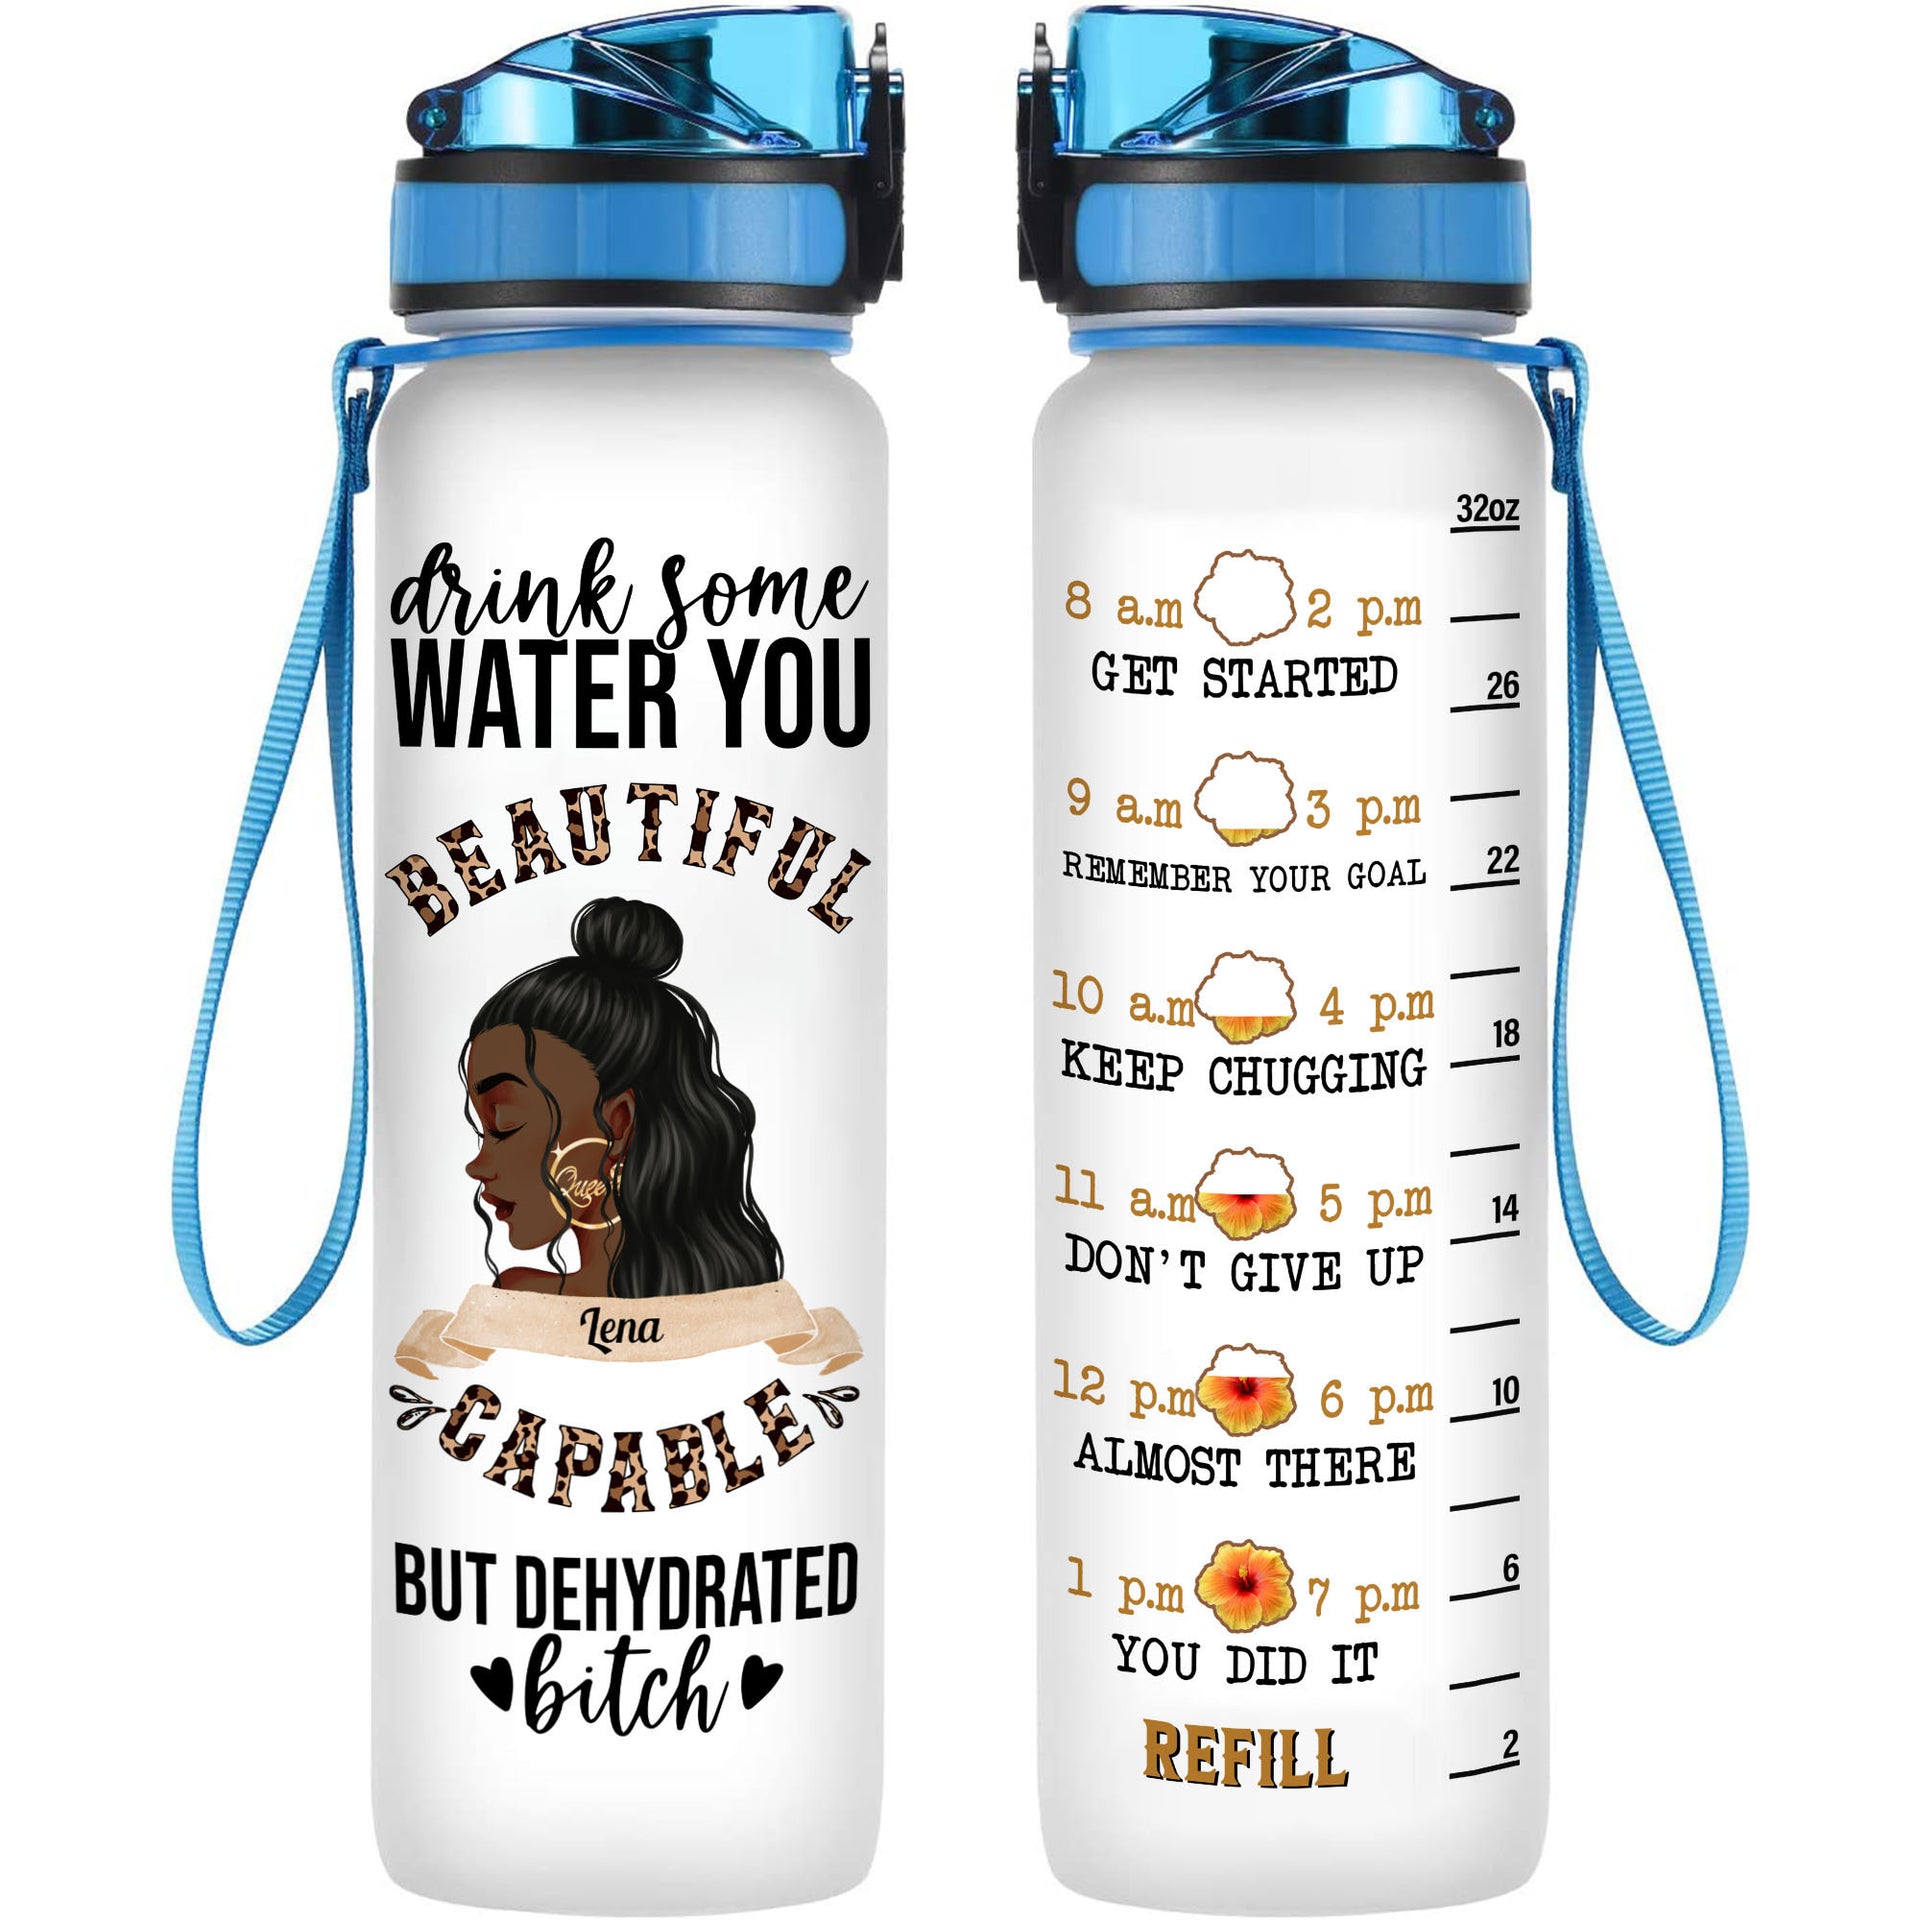 https://macorner.co/cdn/shop/products/Drink-Water-You-Beautiful-Bch-Personalized-Water-Tracker-Bottle-Birthday-Gift-For-Her-Black-Girl-Black-Woman-Sassy-Funny-Gift-4.jpg?v=1646297785&width=1920